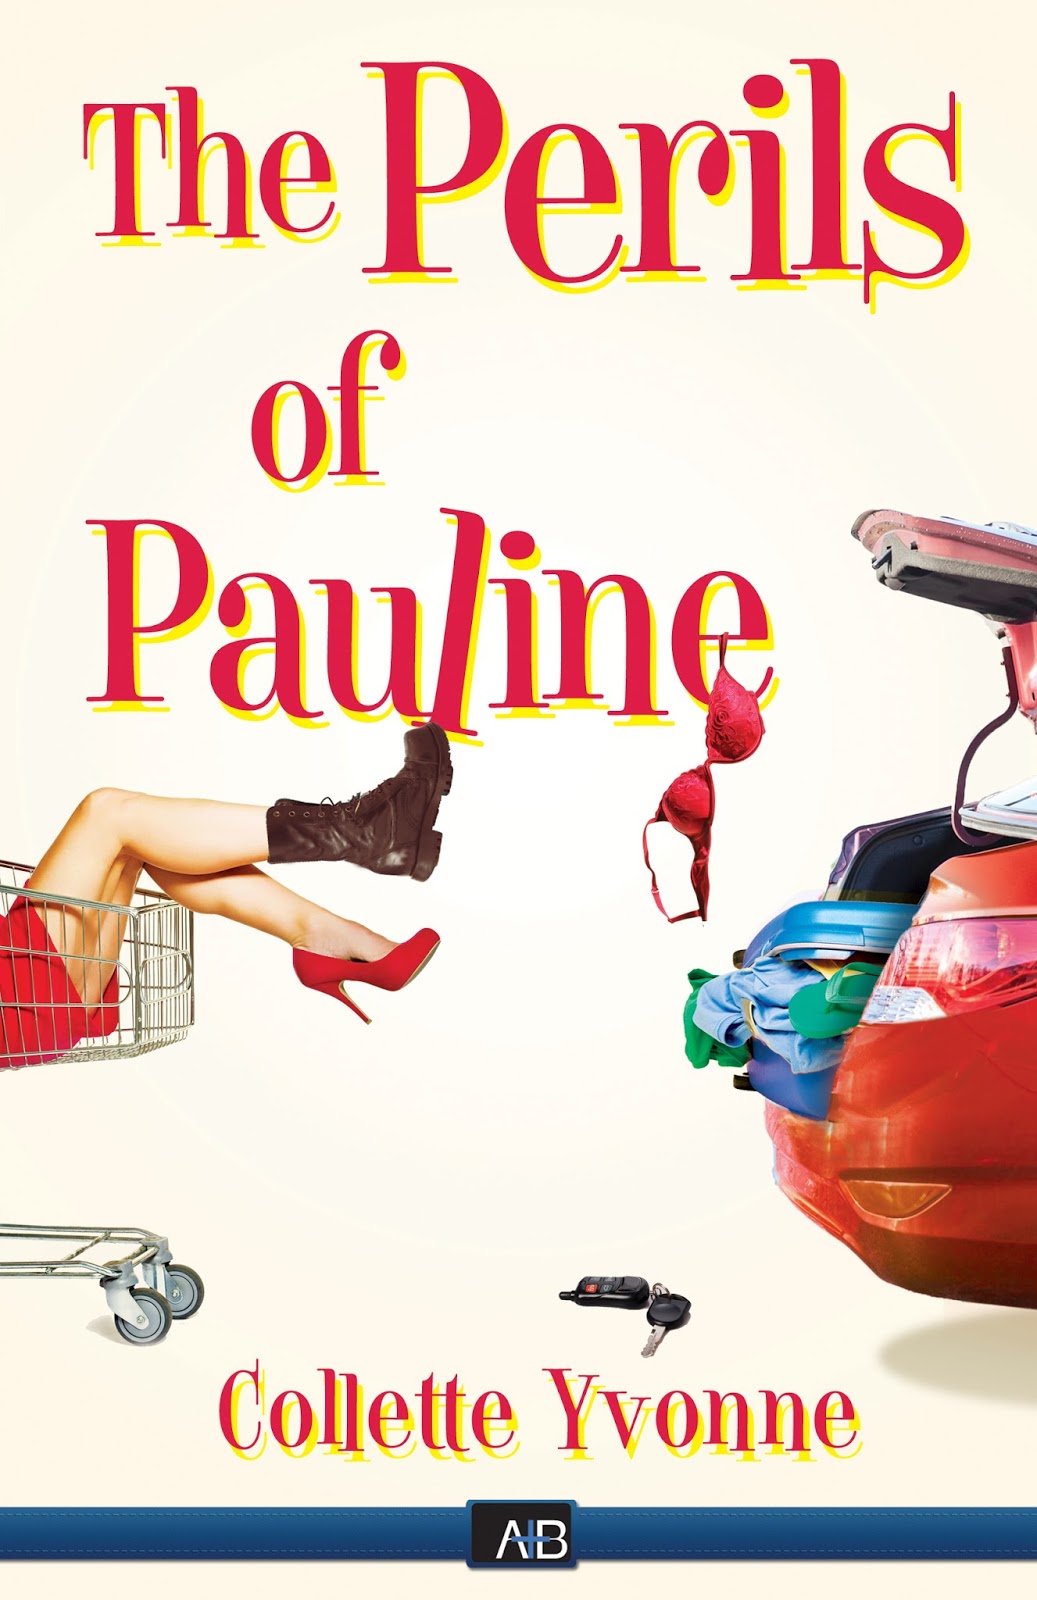 BOOK REVIEW: THE PERILS OF PAULINE BY COLLETTE YVONNE